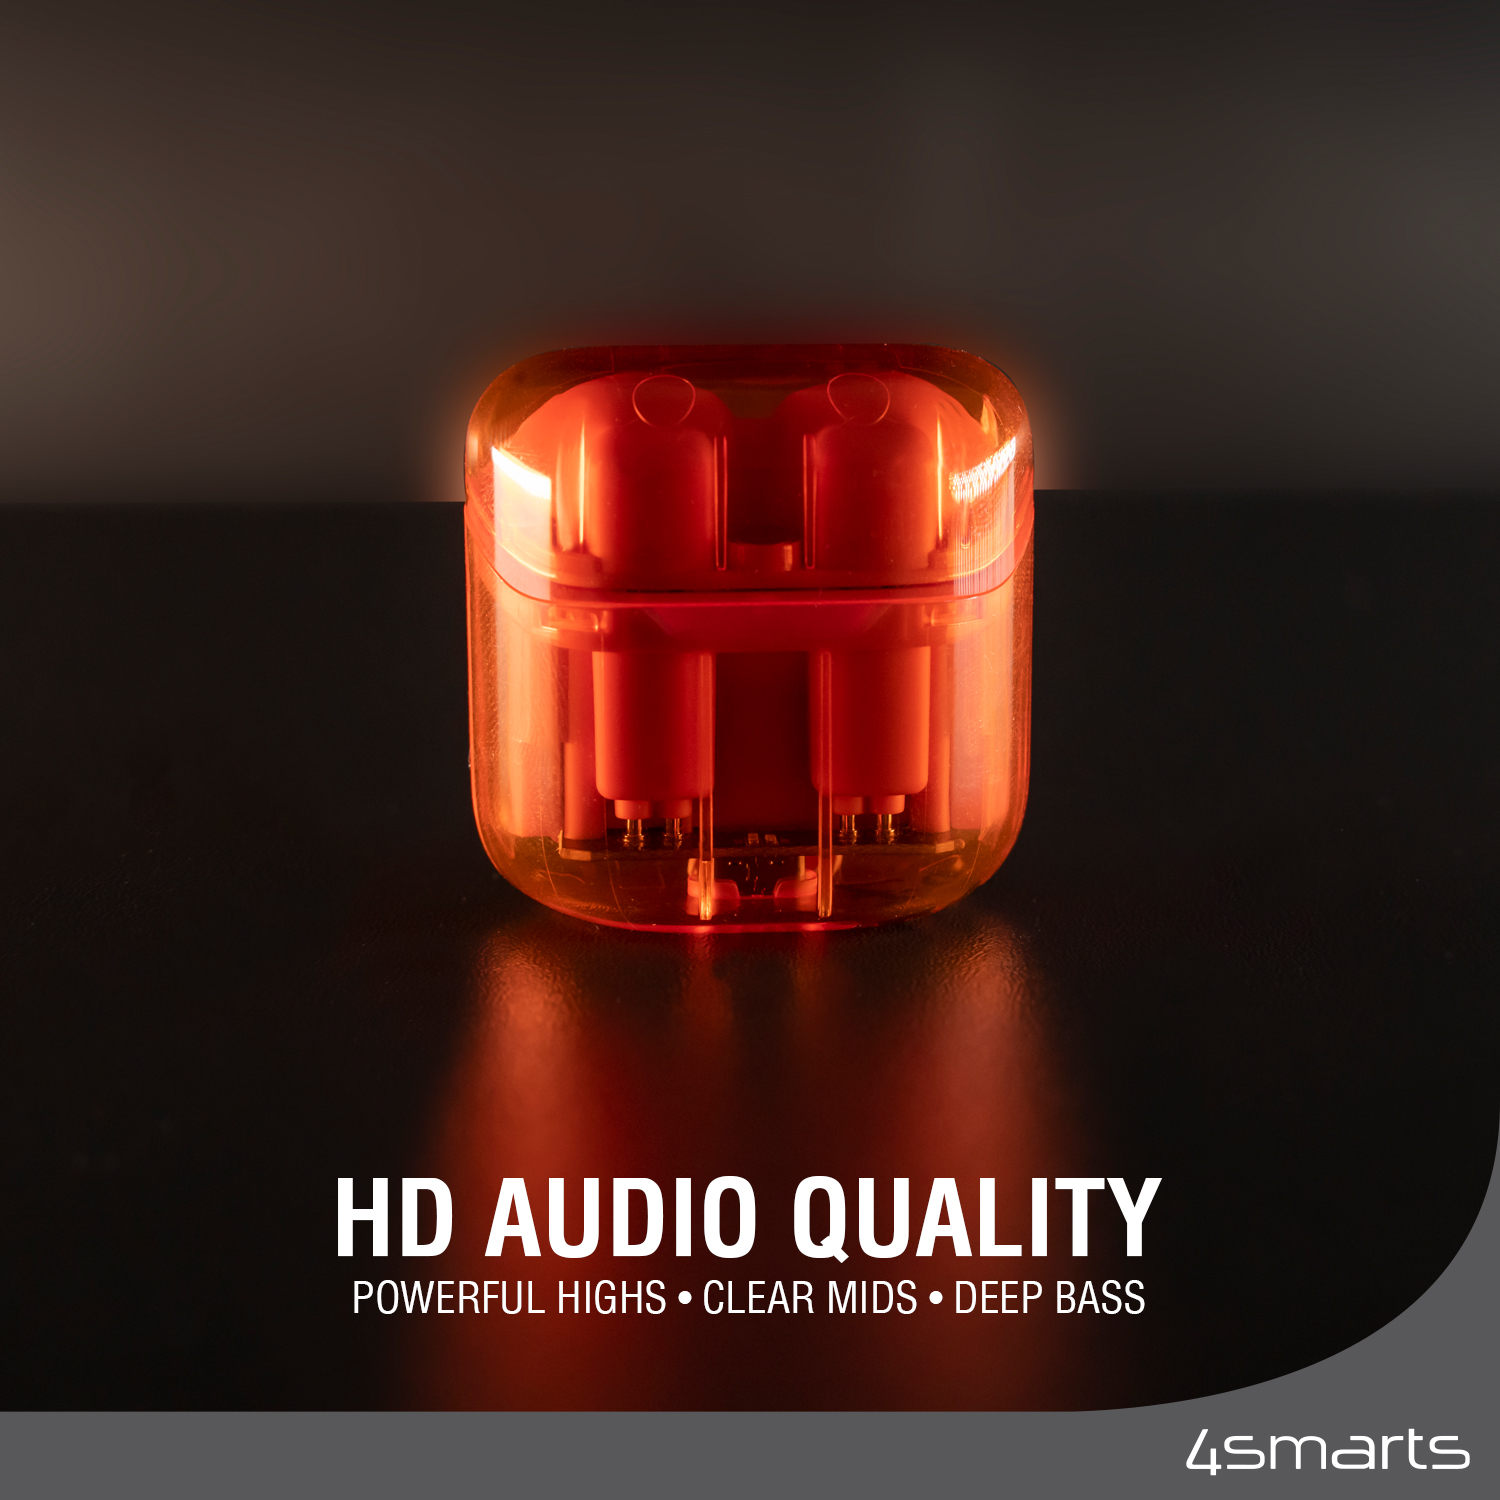 The Lucid wireless headphones will amaze you with their HD audio quality.